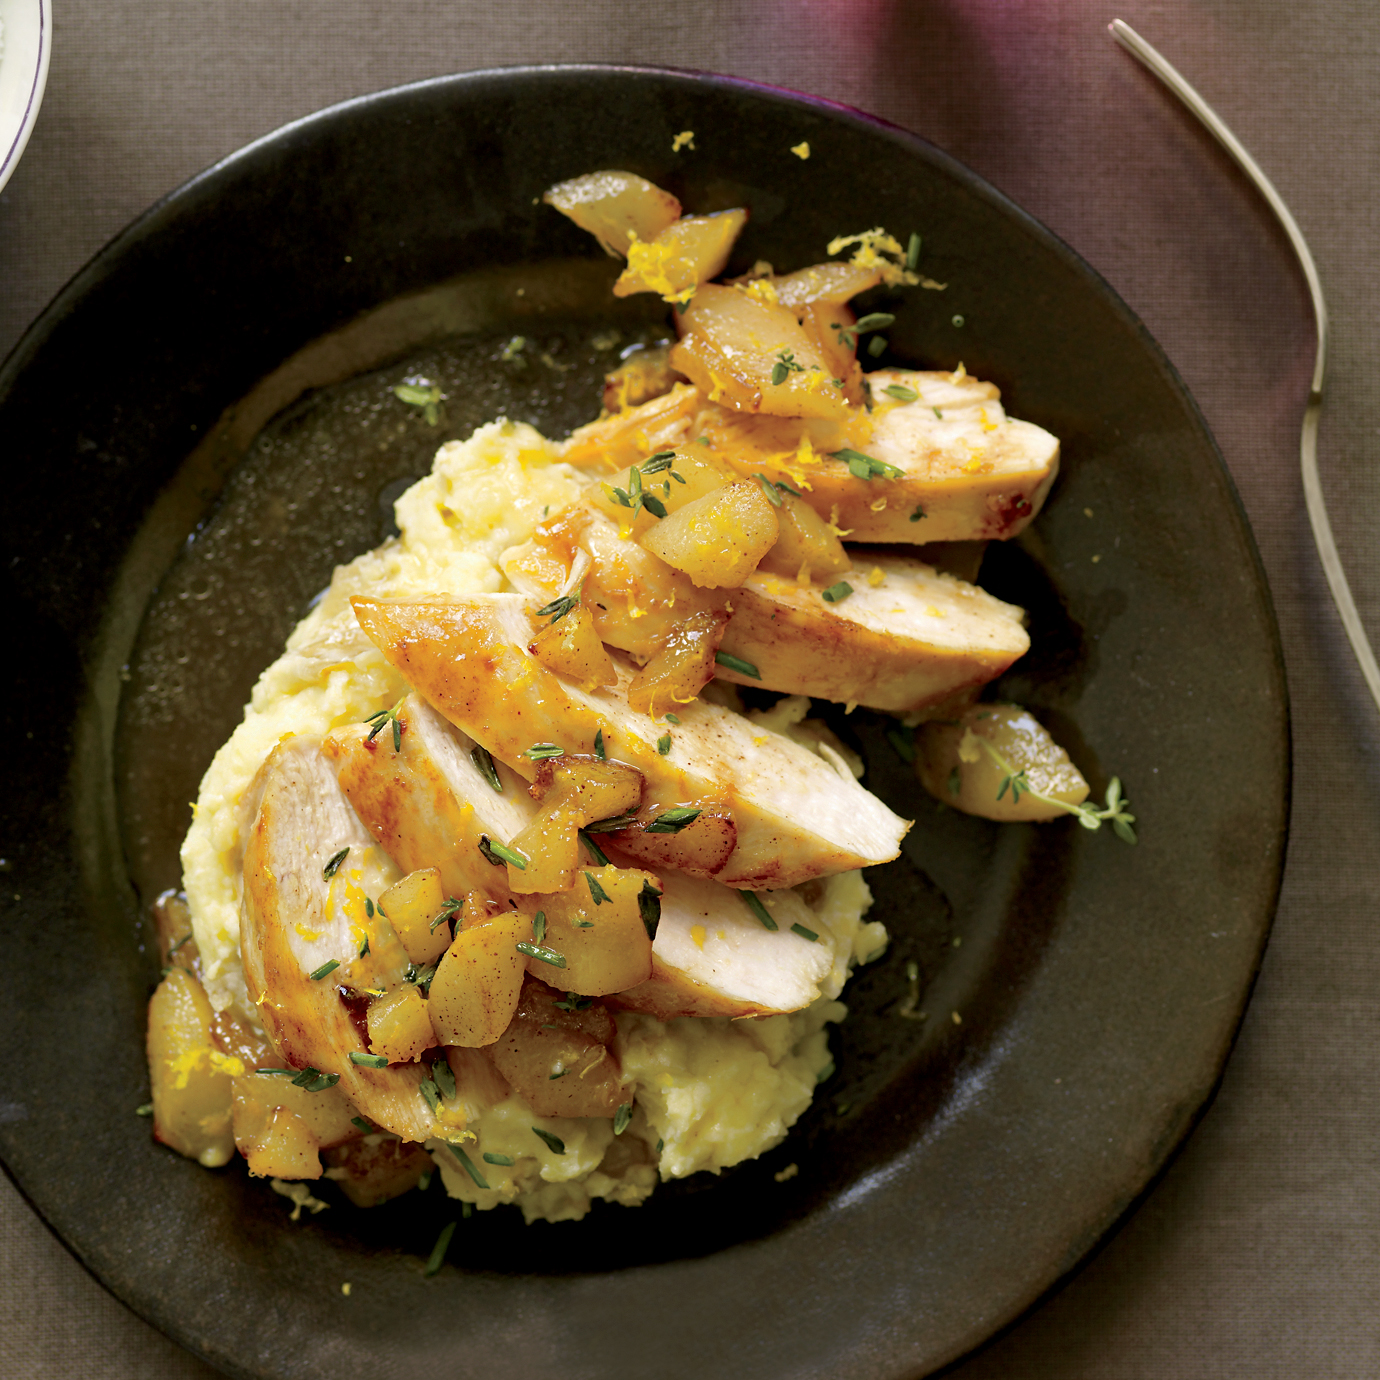 chicken with apples, pears and camembert mashed potatoes